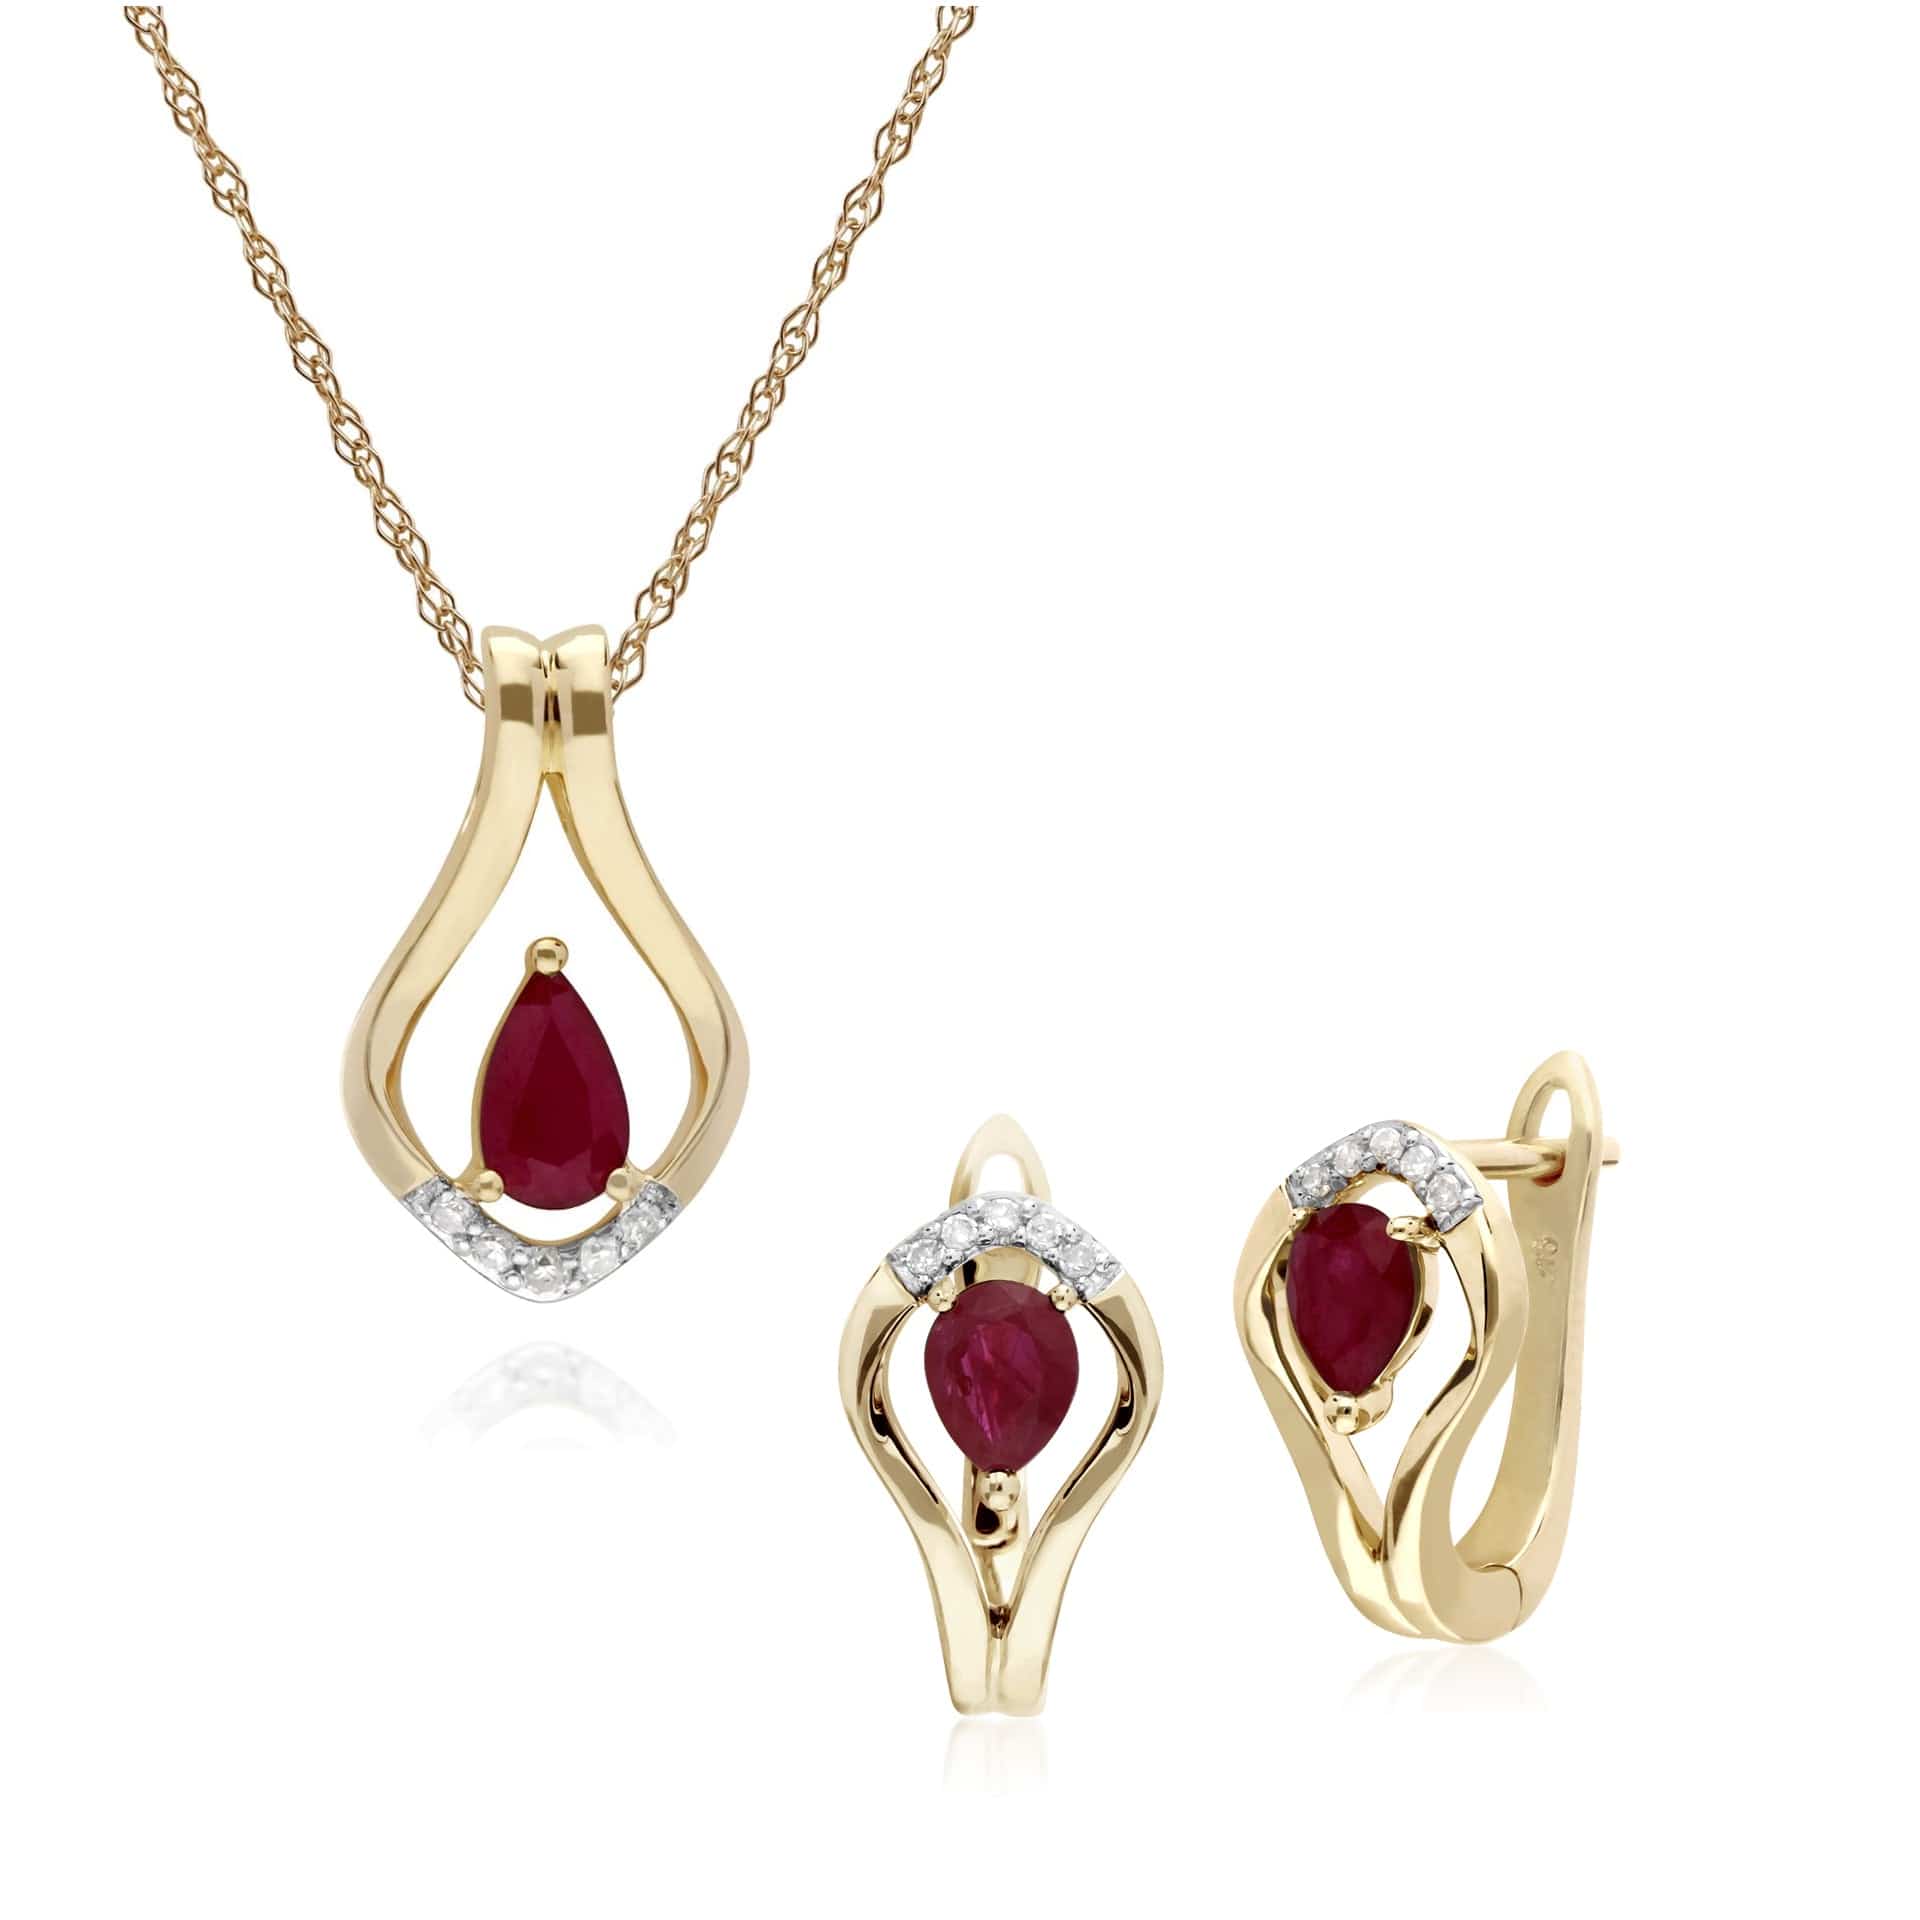 135E1578019-135P1916019 Classic Oval Ruby & Diamond Leaf Lever back Earrings & Pendant Set in 9ct Yellow Gold 1